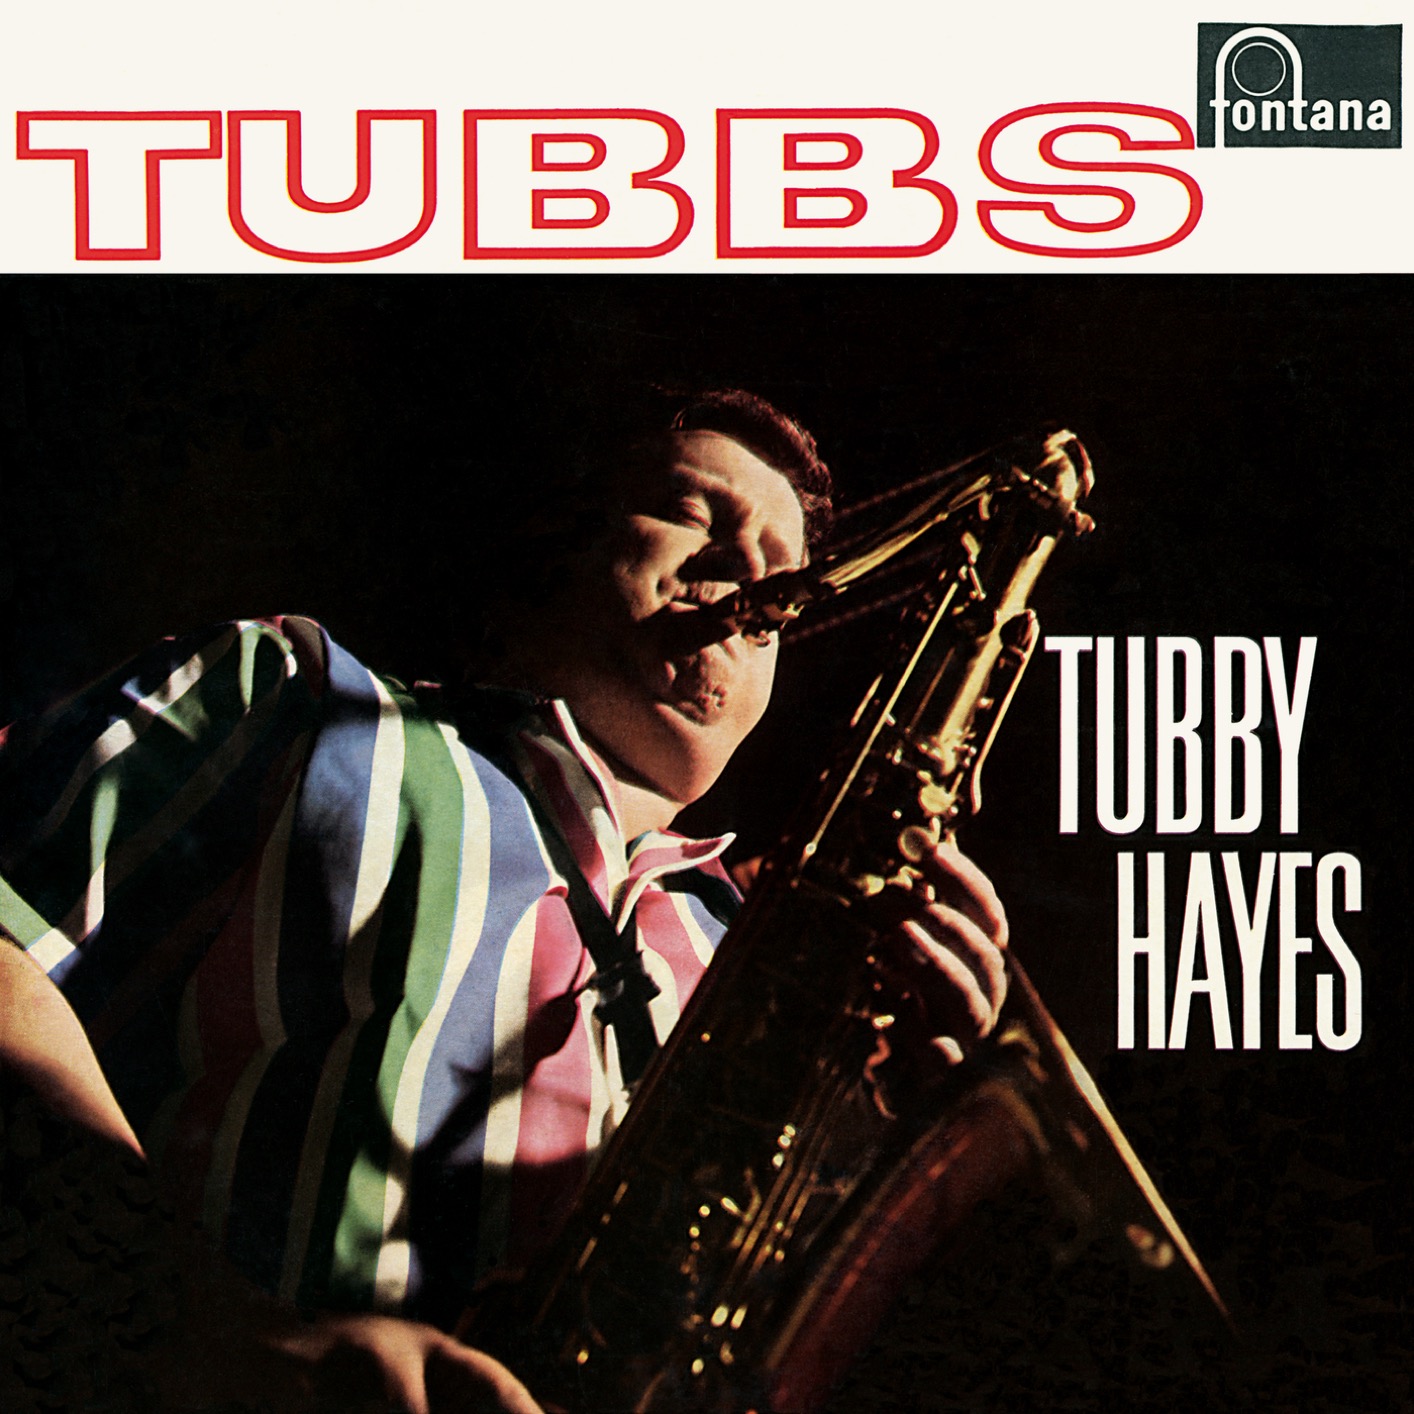 Tubby Hayes - Tubbs (Remastered) (1961/2019) [FLAC 24bit/88,2kHz]